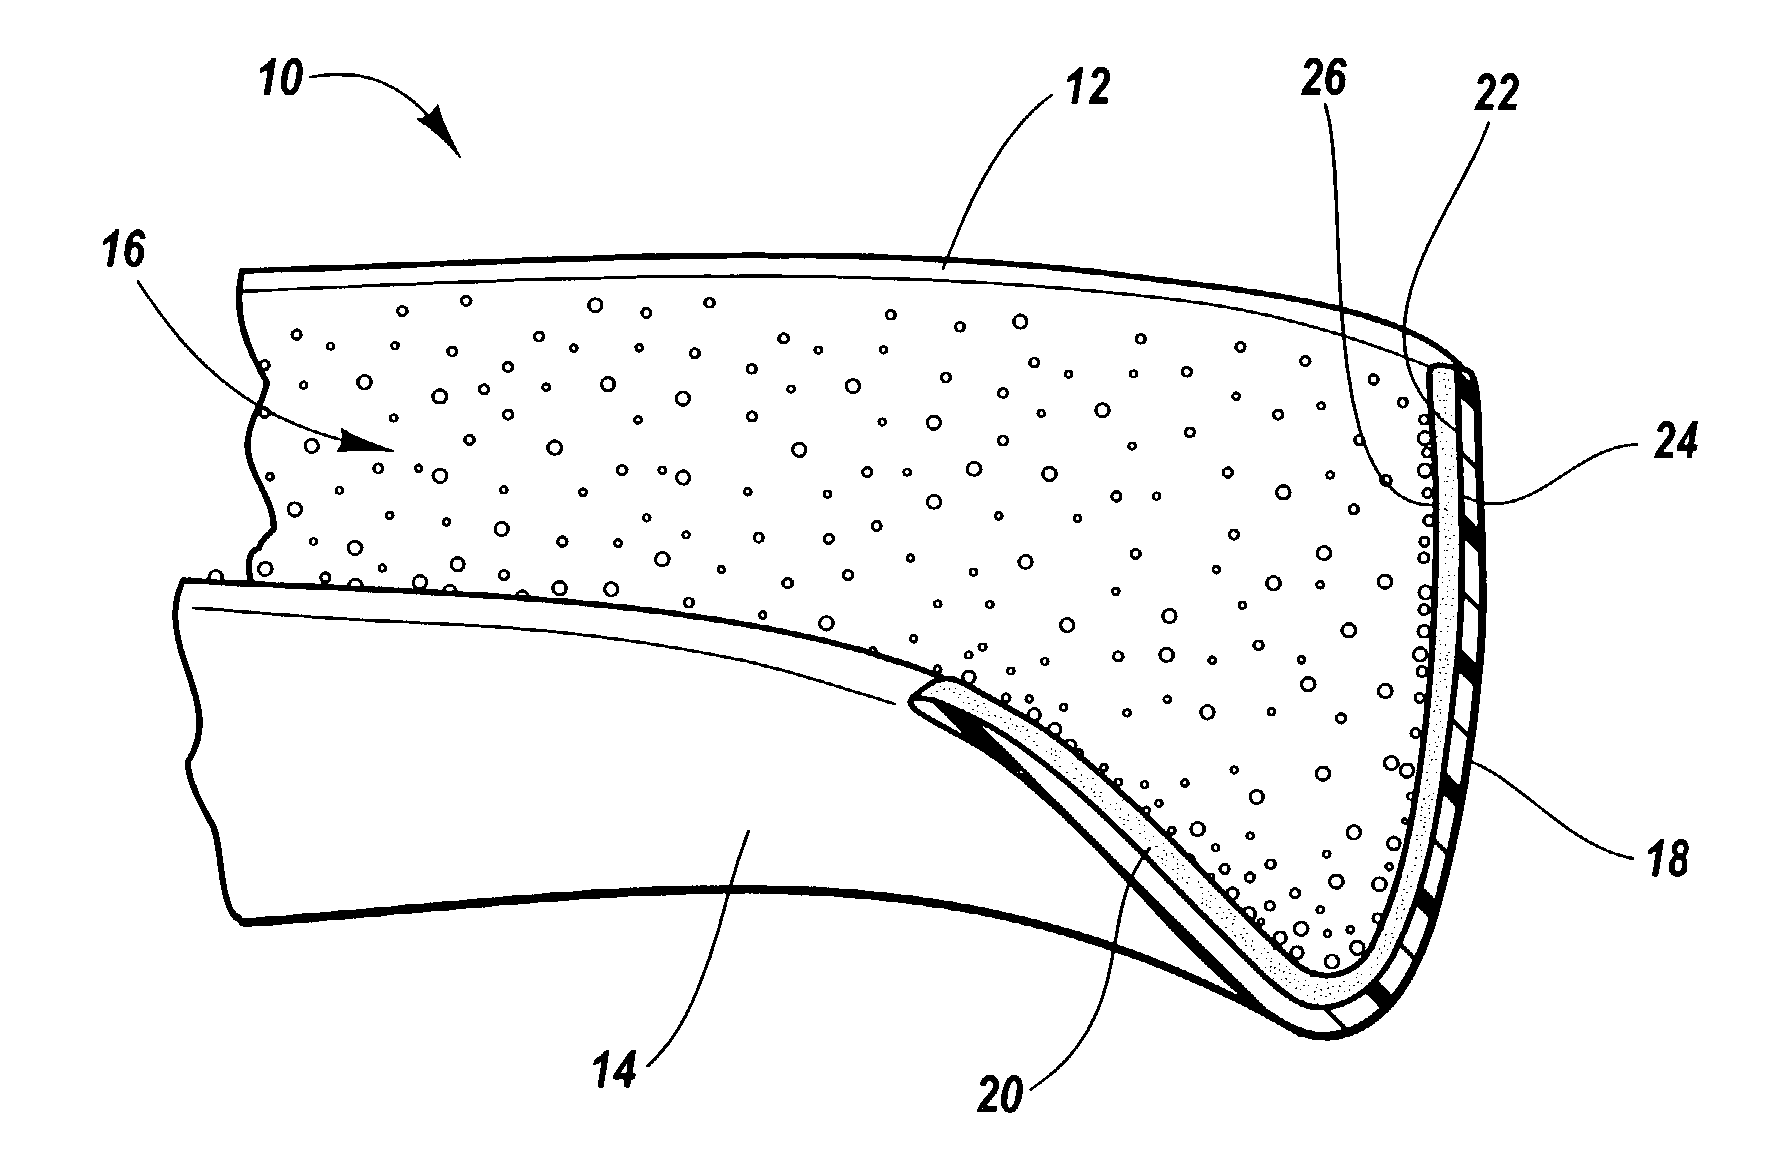 Tray-like dental bleaching devices having a barrier layer and a substantially solid bleaching composition